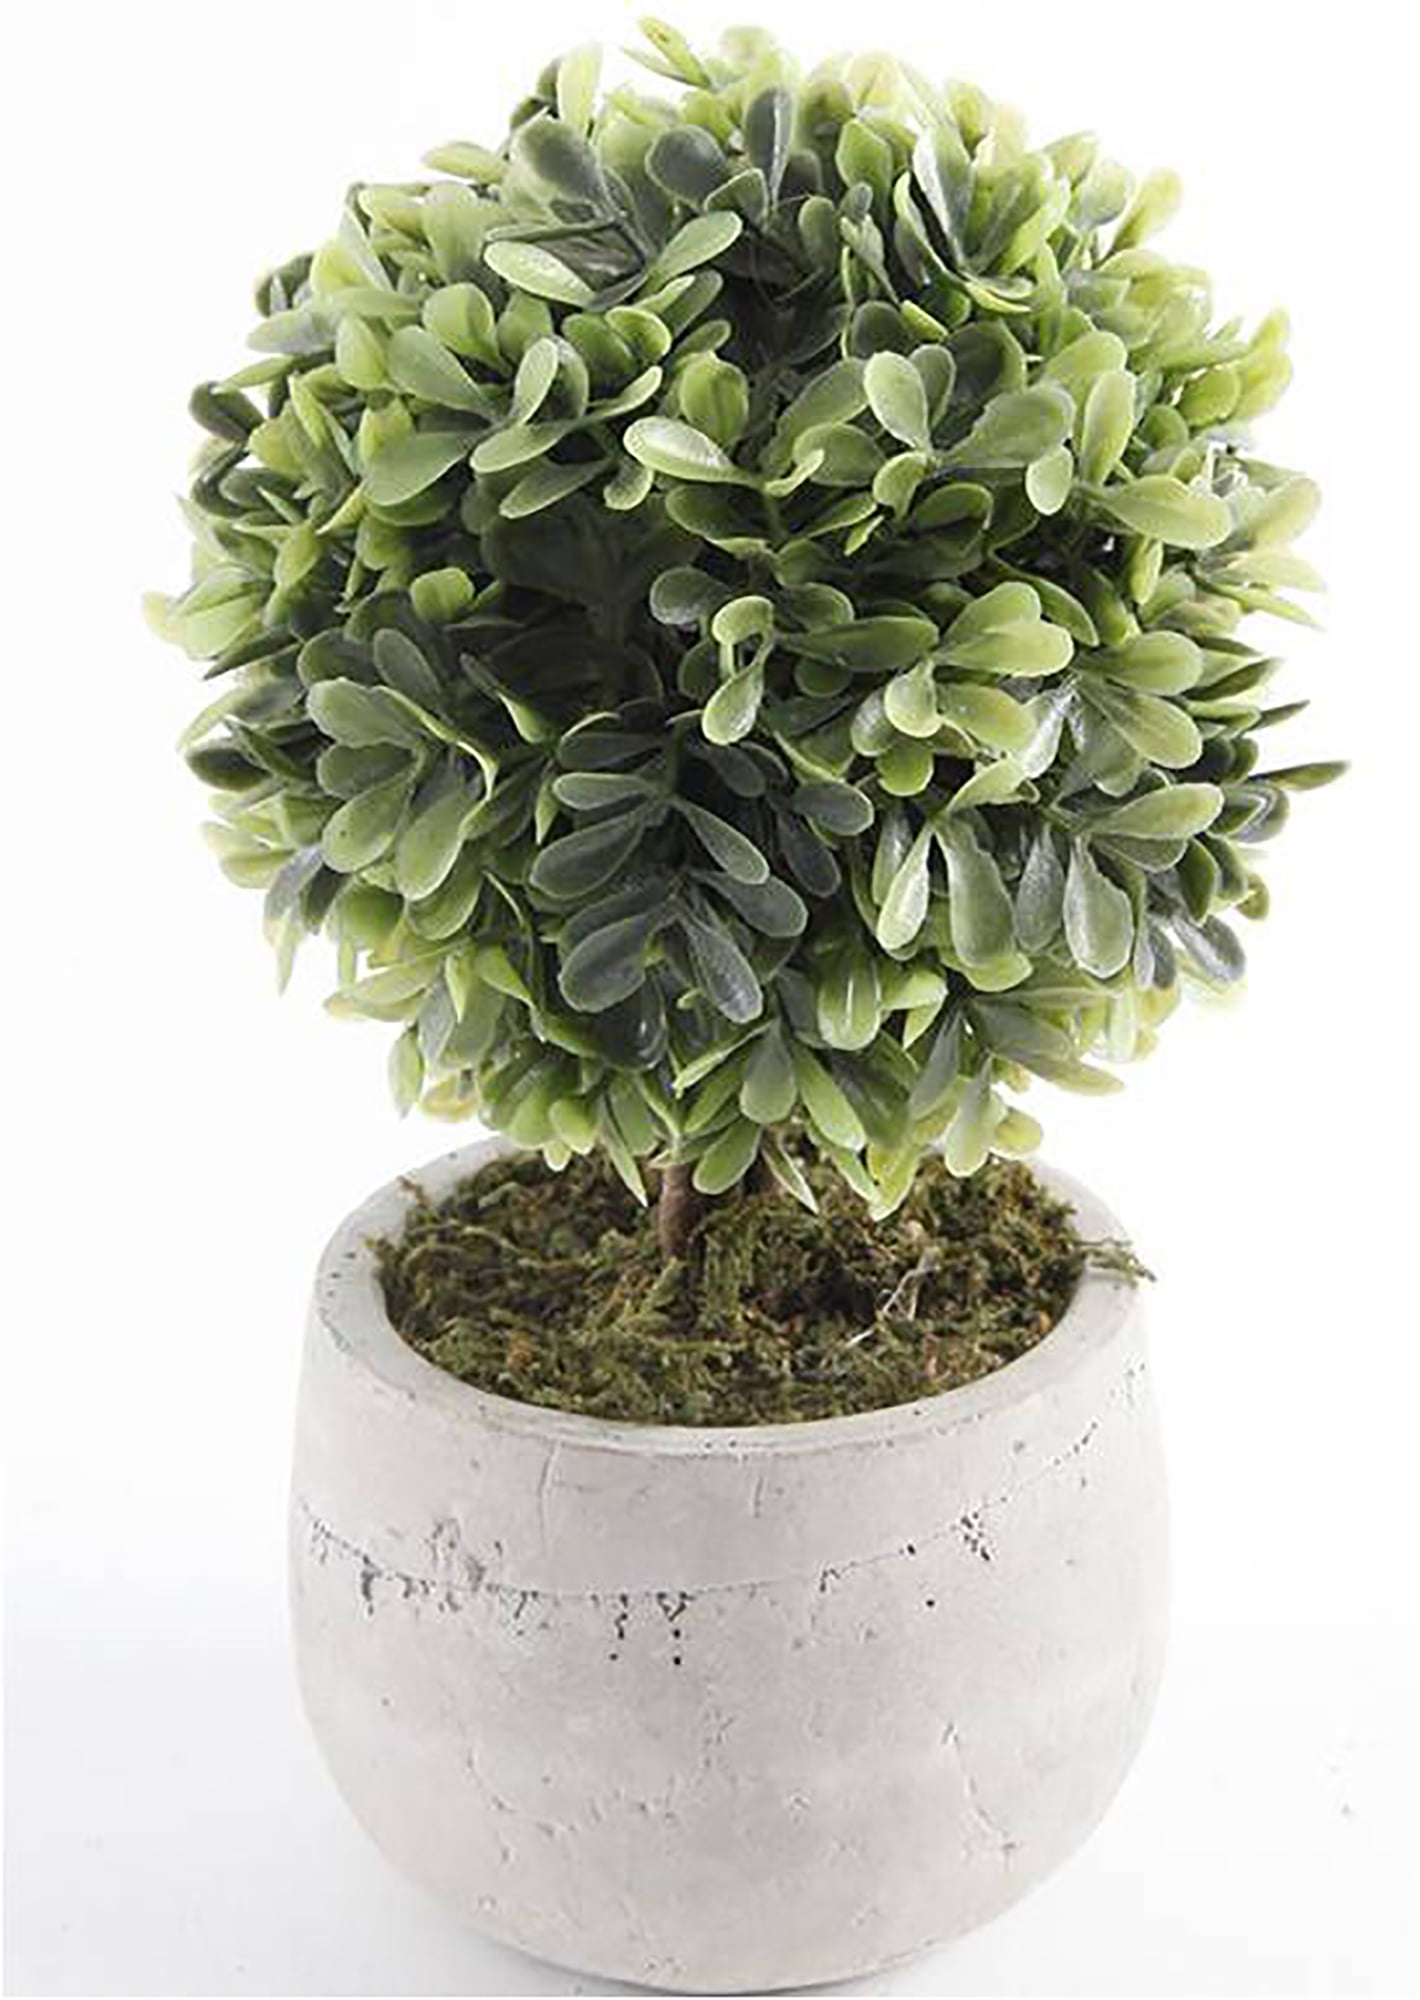 Mainstays 7.5" Artificial Mini Boxwood Topiary in Gray Cement Planter (7.5"H x 4.5"W x 4.5"D)